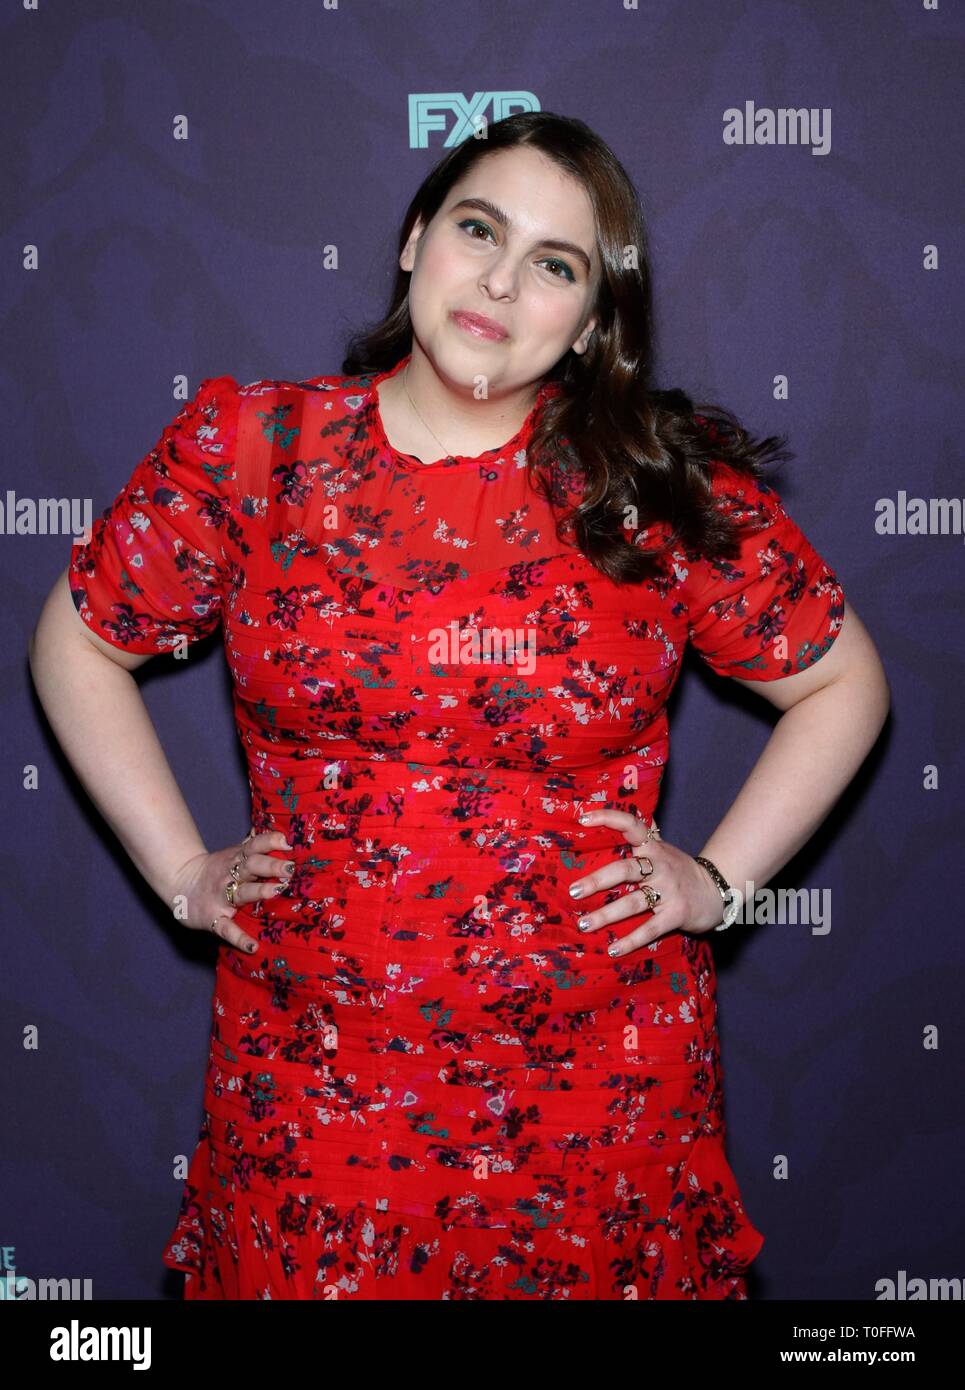 New York, NY, USA. 19th Mar, 2019. Beanie Feldstein at arrivals for WHAT WE  DO IN THE SHADOWS Series Premiere on FX, New York, NY March 19, 2019.  Credit: Eli Winston/Everett Collection/Alamy